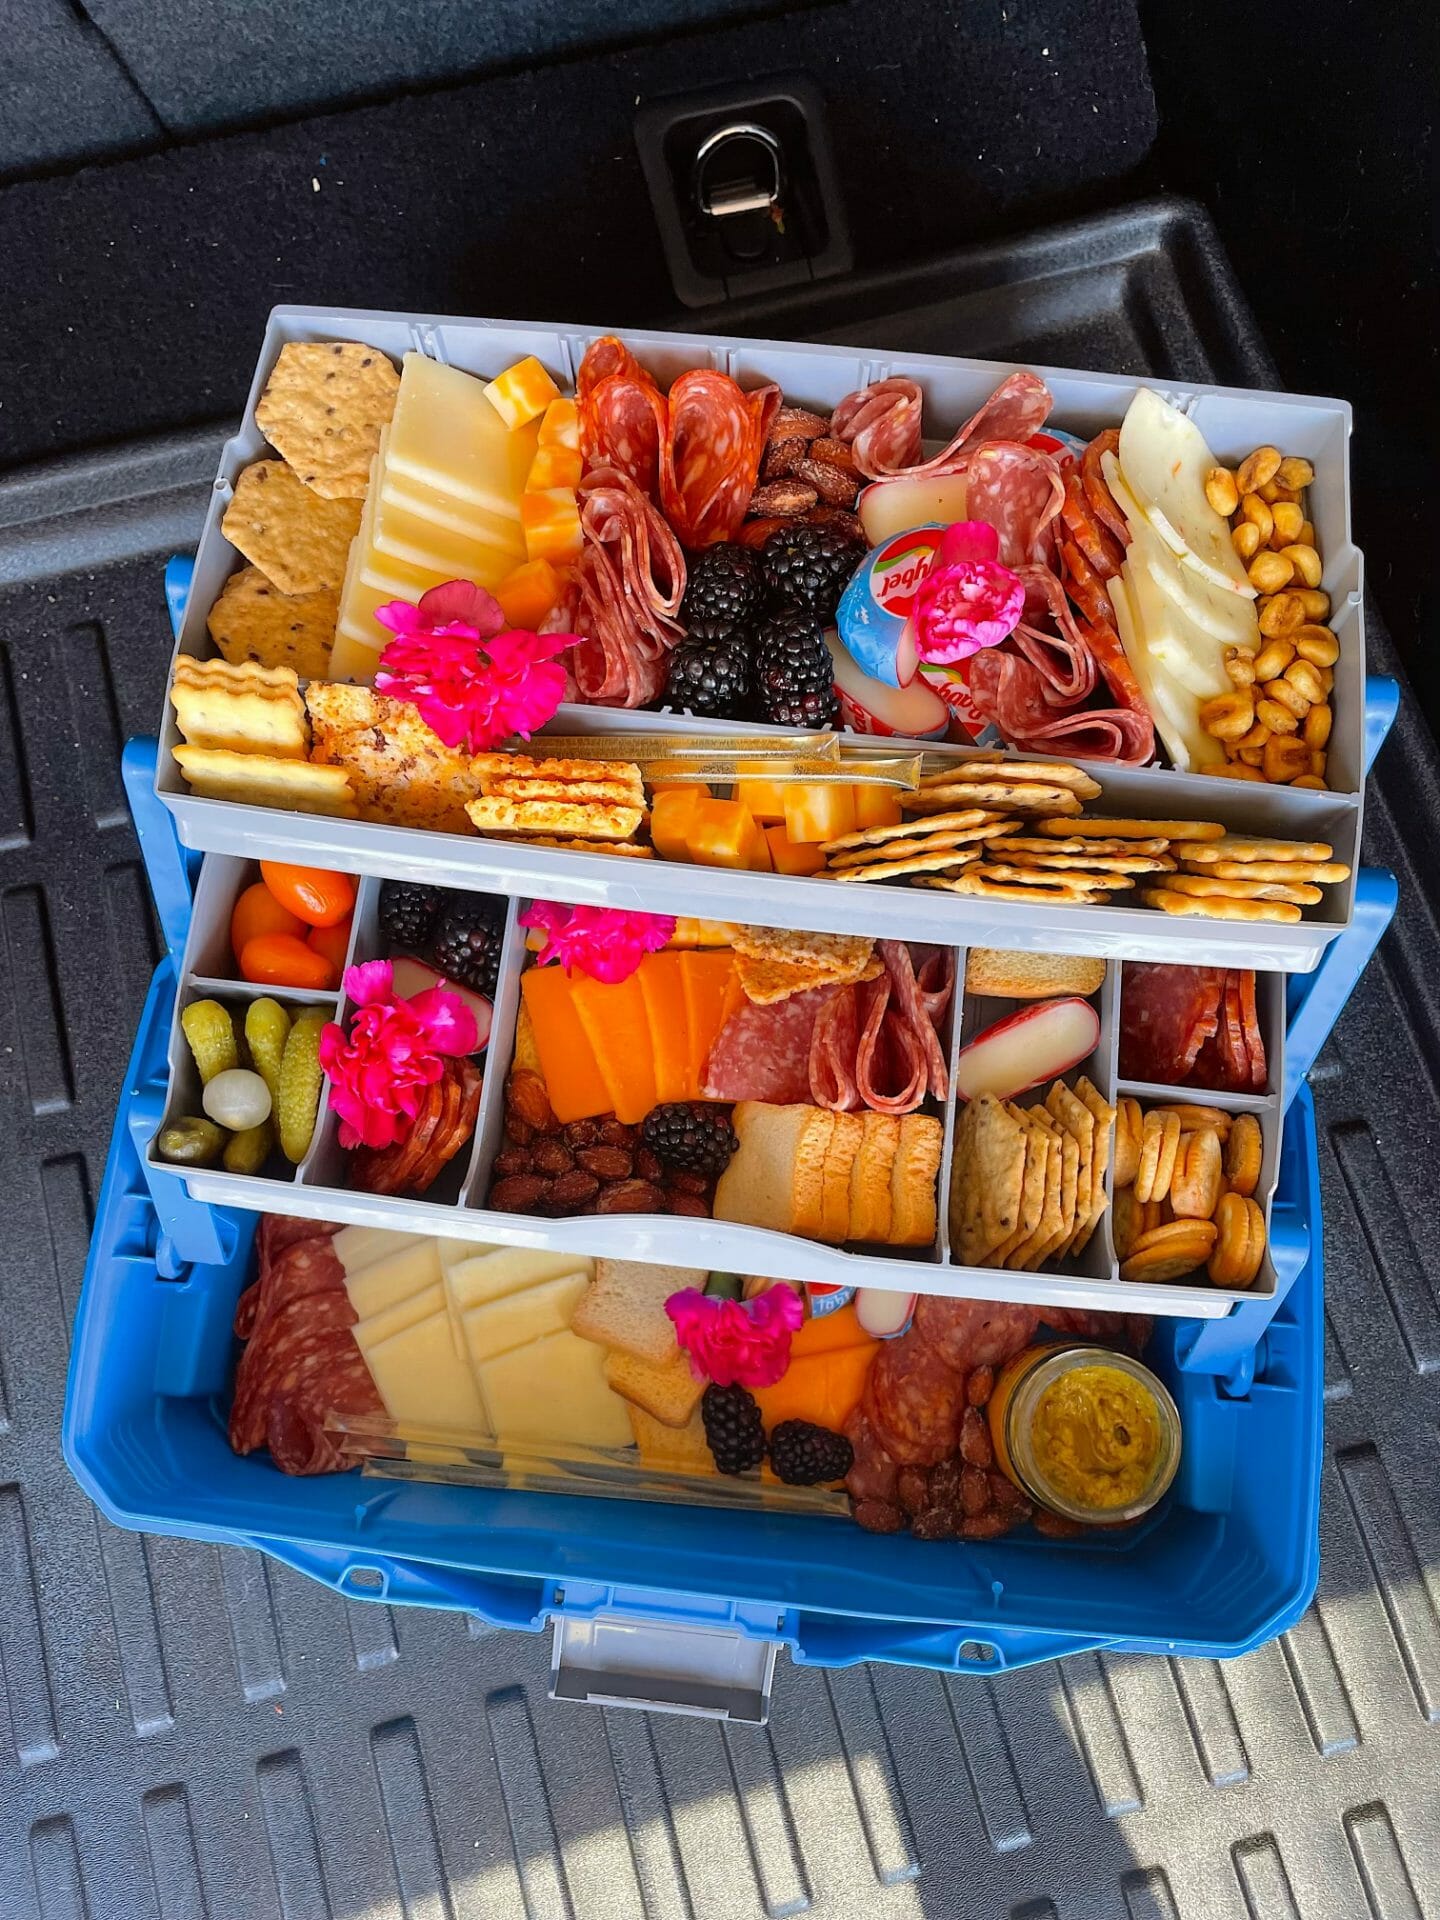 Snacks in a tackle box - Just for fun, Snack Tackle Box For Kids